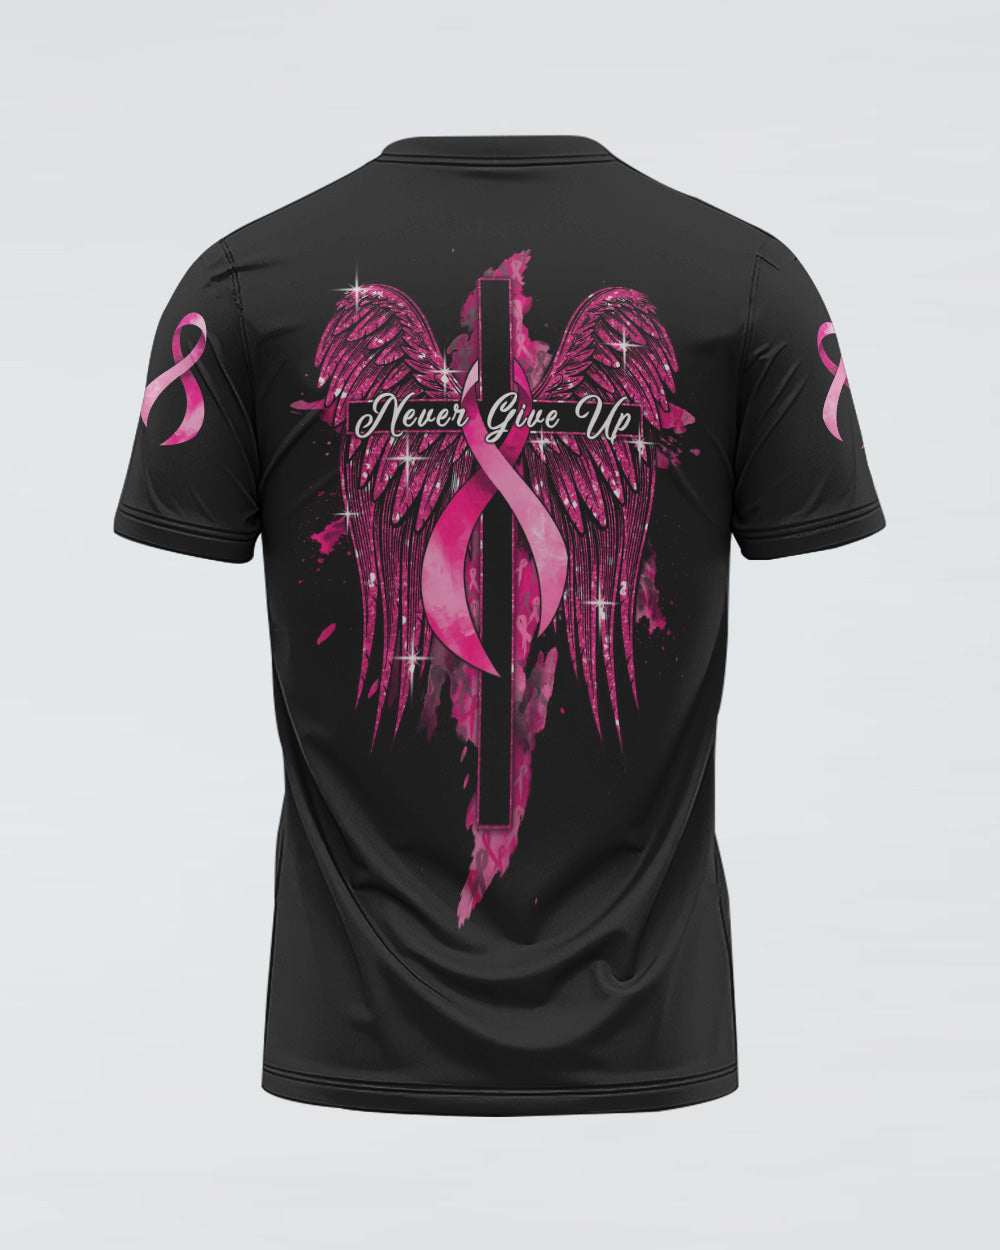 Never Give Up Glitter Wings Women's Breast Cancer Awareness Tshirt